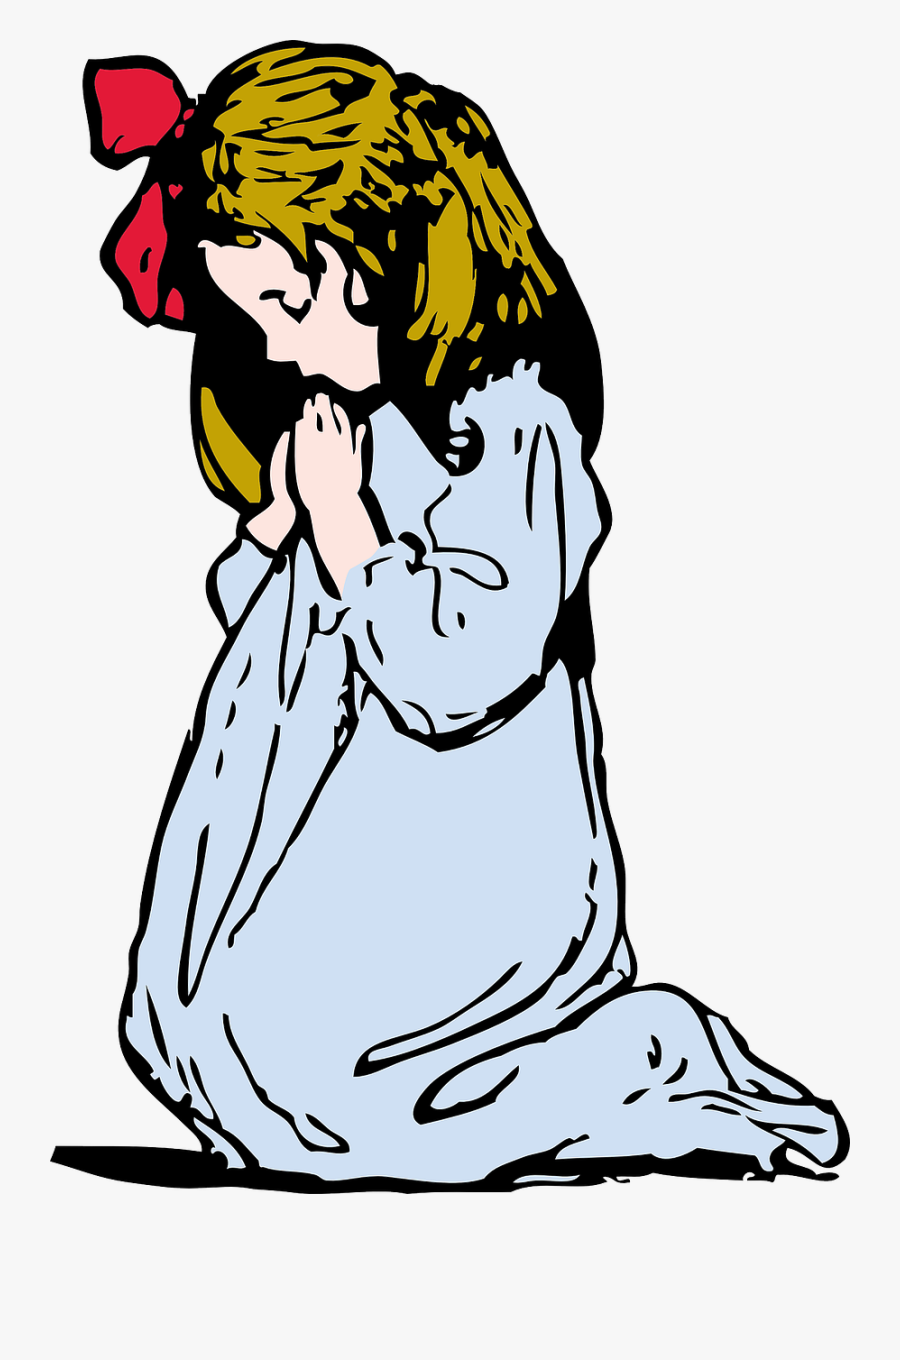 People Praying Clipart At Getdrawings - Praying Girl Clipart, Transparent Clipart